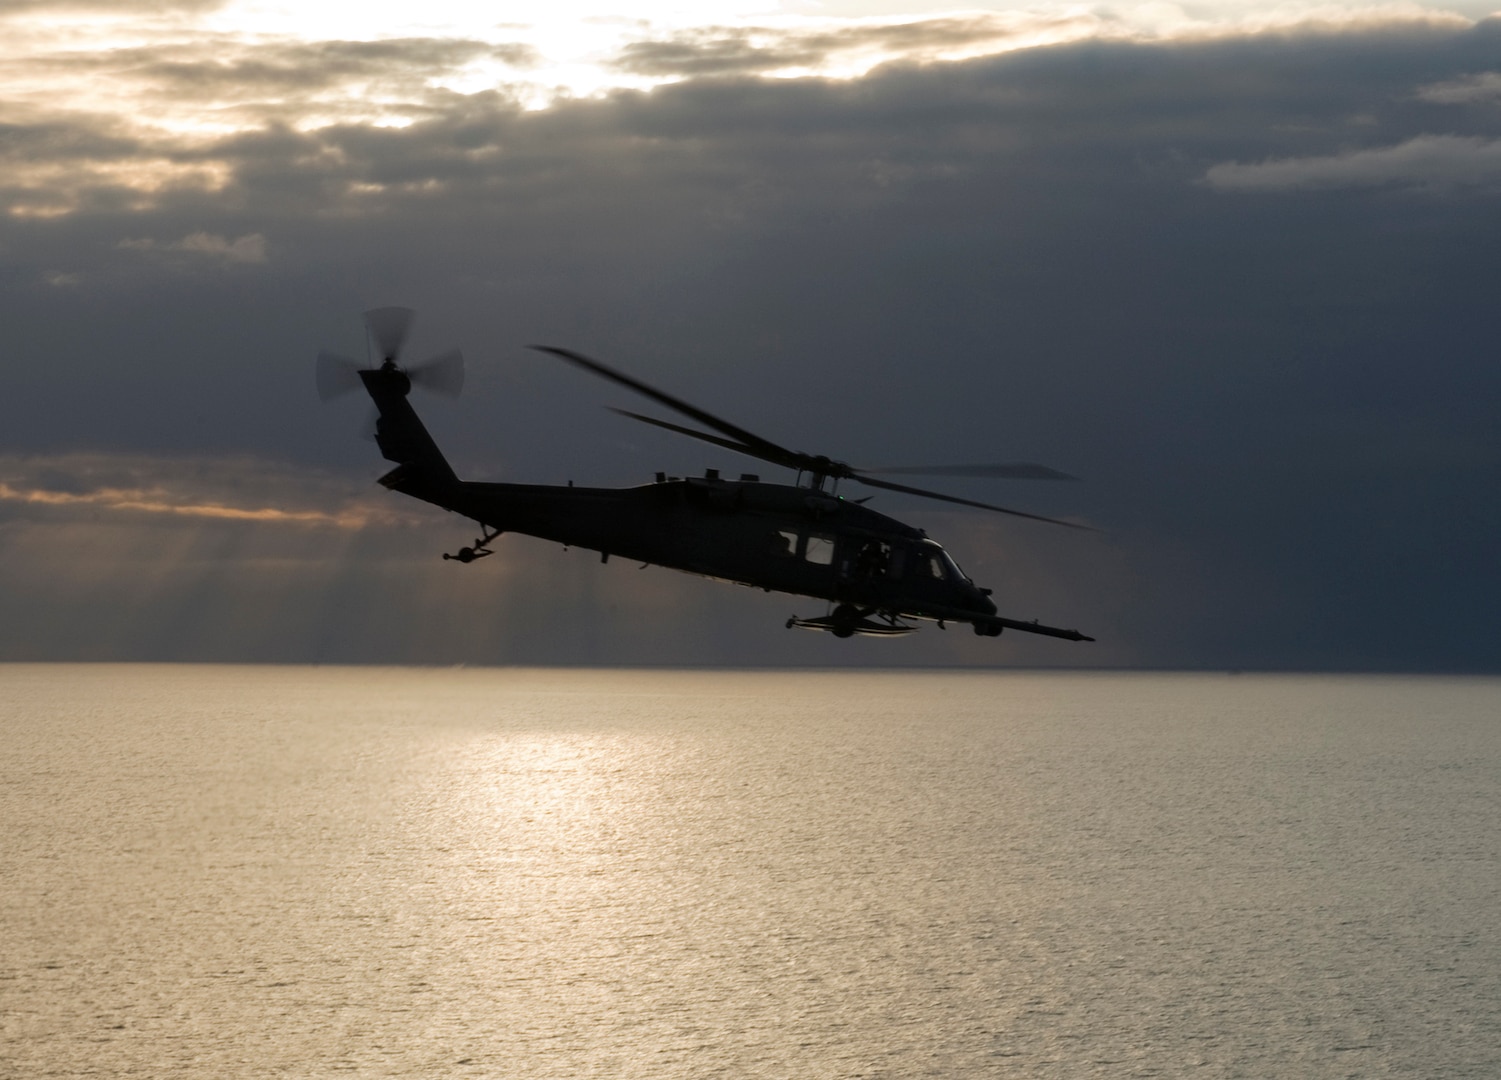 An Alaska Air National Guard HH-60 Pave Hawk combat search and rescue helicopter from the 210th Rescue Squadron flies over Cook Inlet April 30, 2013. Airmen with the Alaska Air National Guard’s 210th, 211th and 212th Rescue Squadrons assisted July 28, 2014, with the transportation of a pregnant woman in labor from Nulato, Alaska.